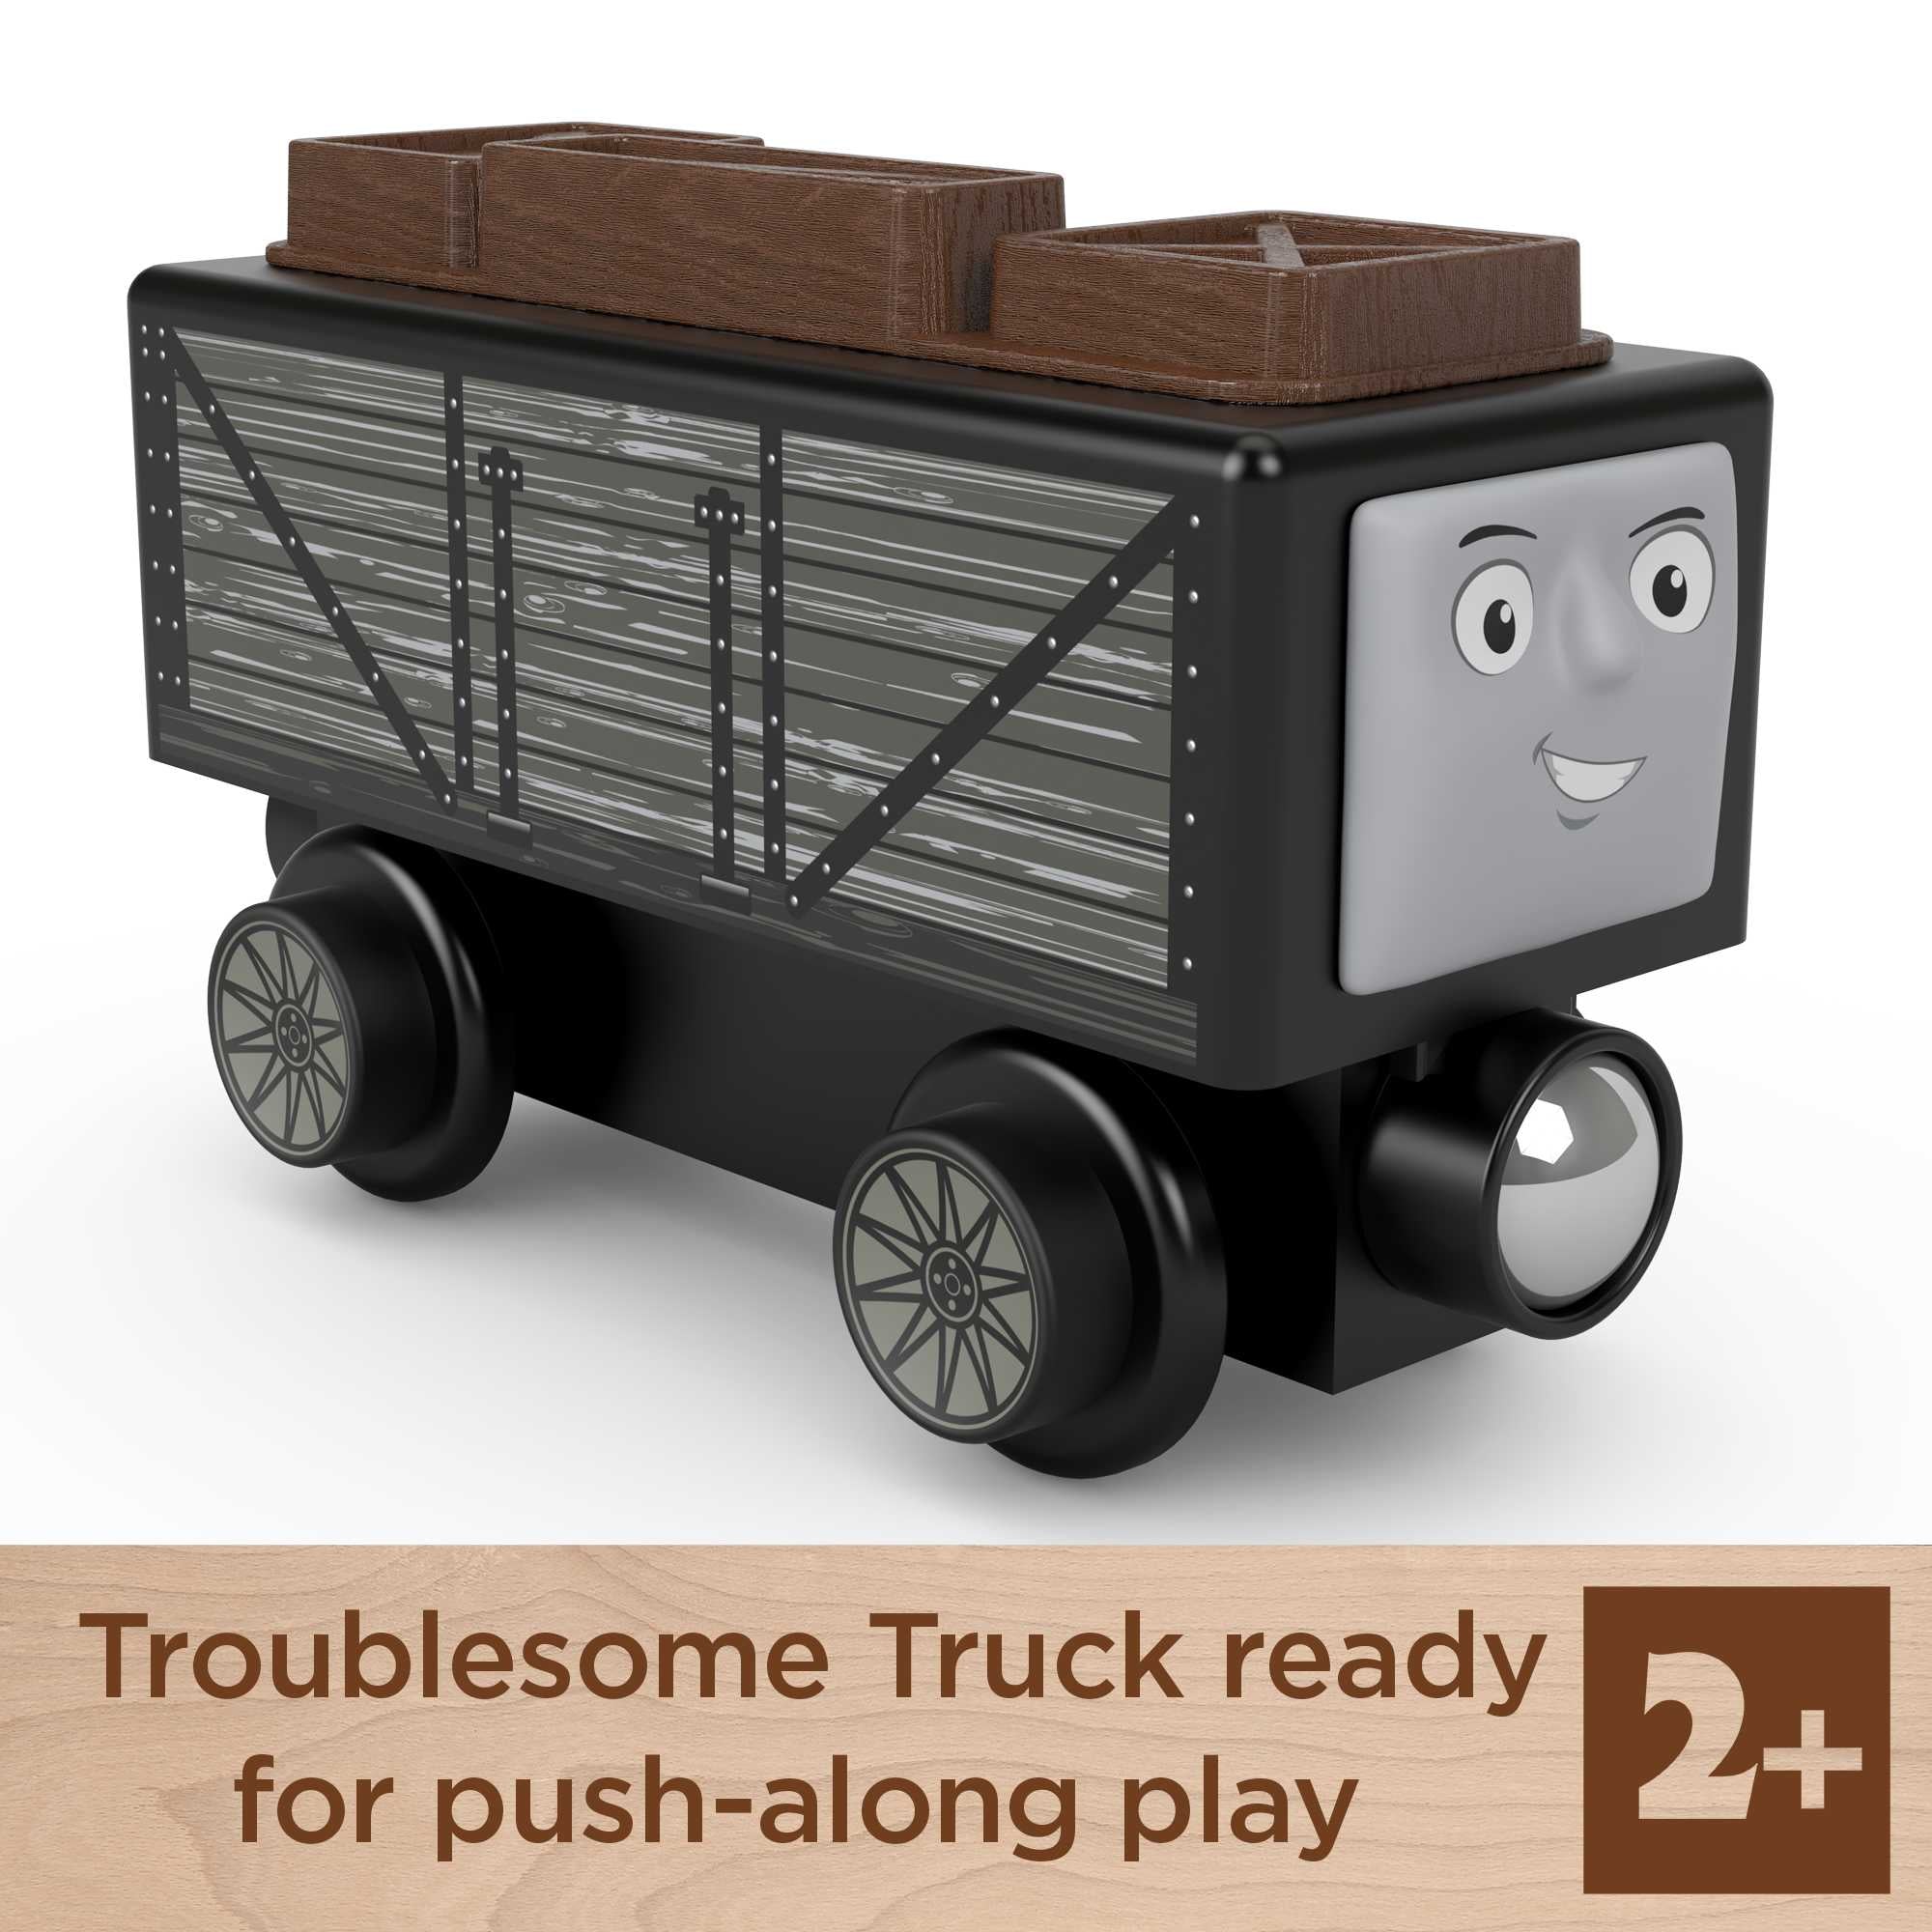 Fisher Price-Thomas & Friends Wooden Railway - Troublesome Truck & Crates-HBJ89-Legacy Toys